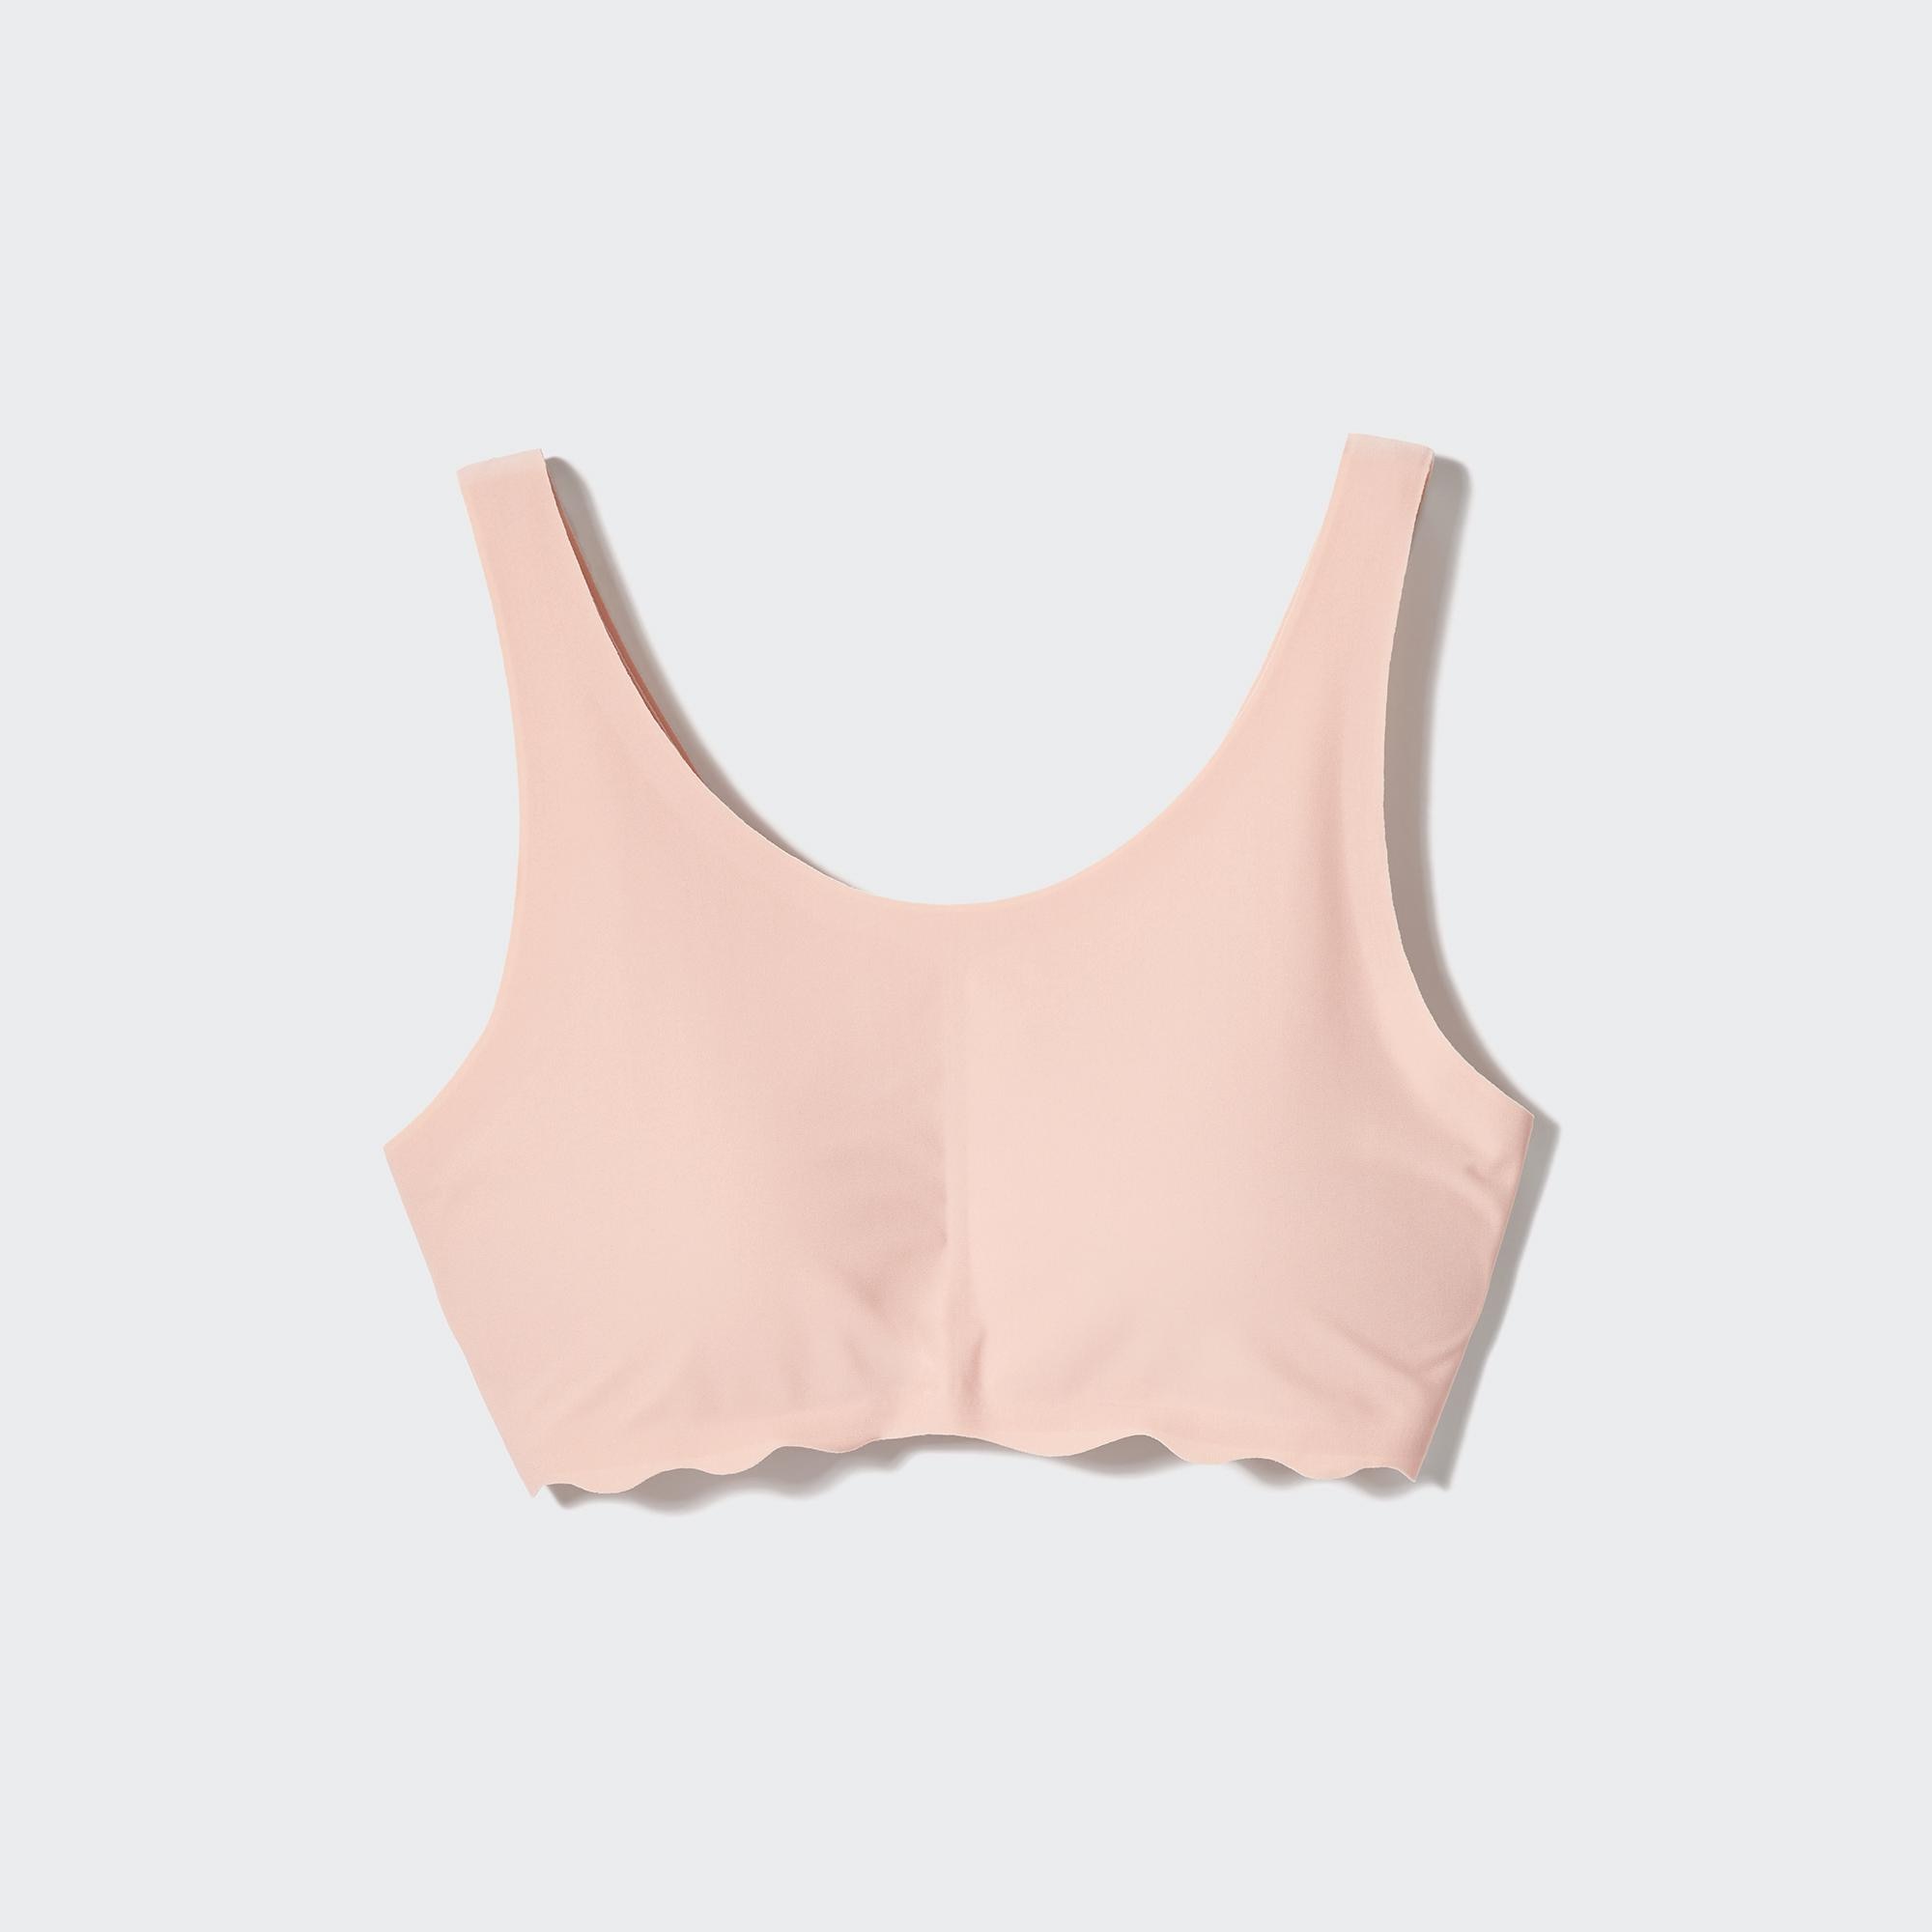 UNIQLO Women Airism Bra (190 ARS) ❤ liked on Polyvore featuring